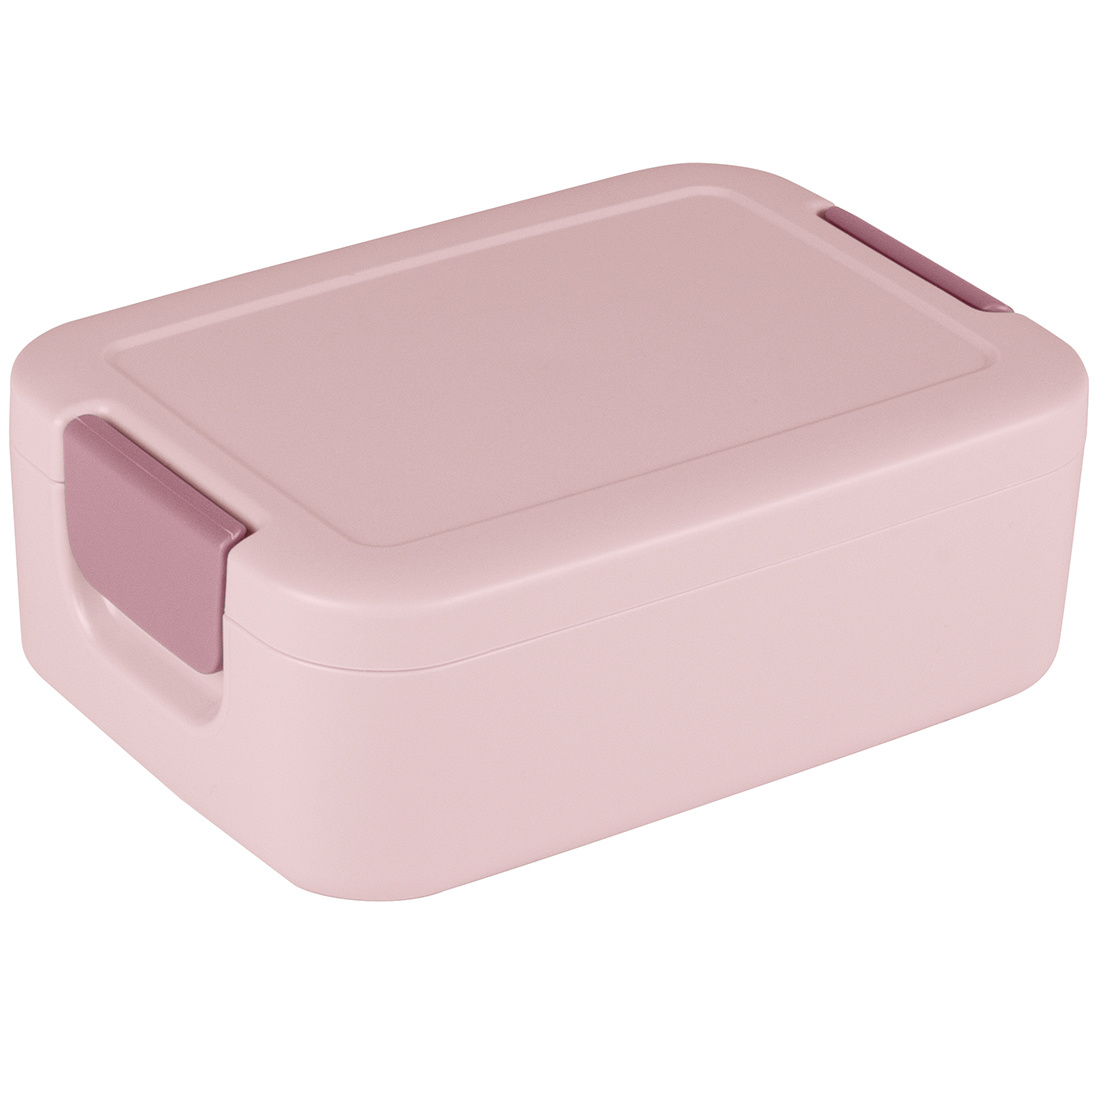 Sigma home Food to go lunch box small pink